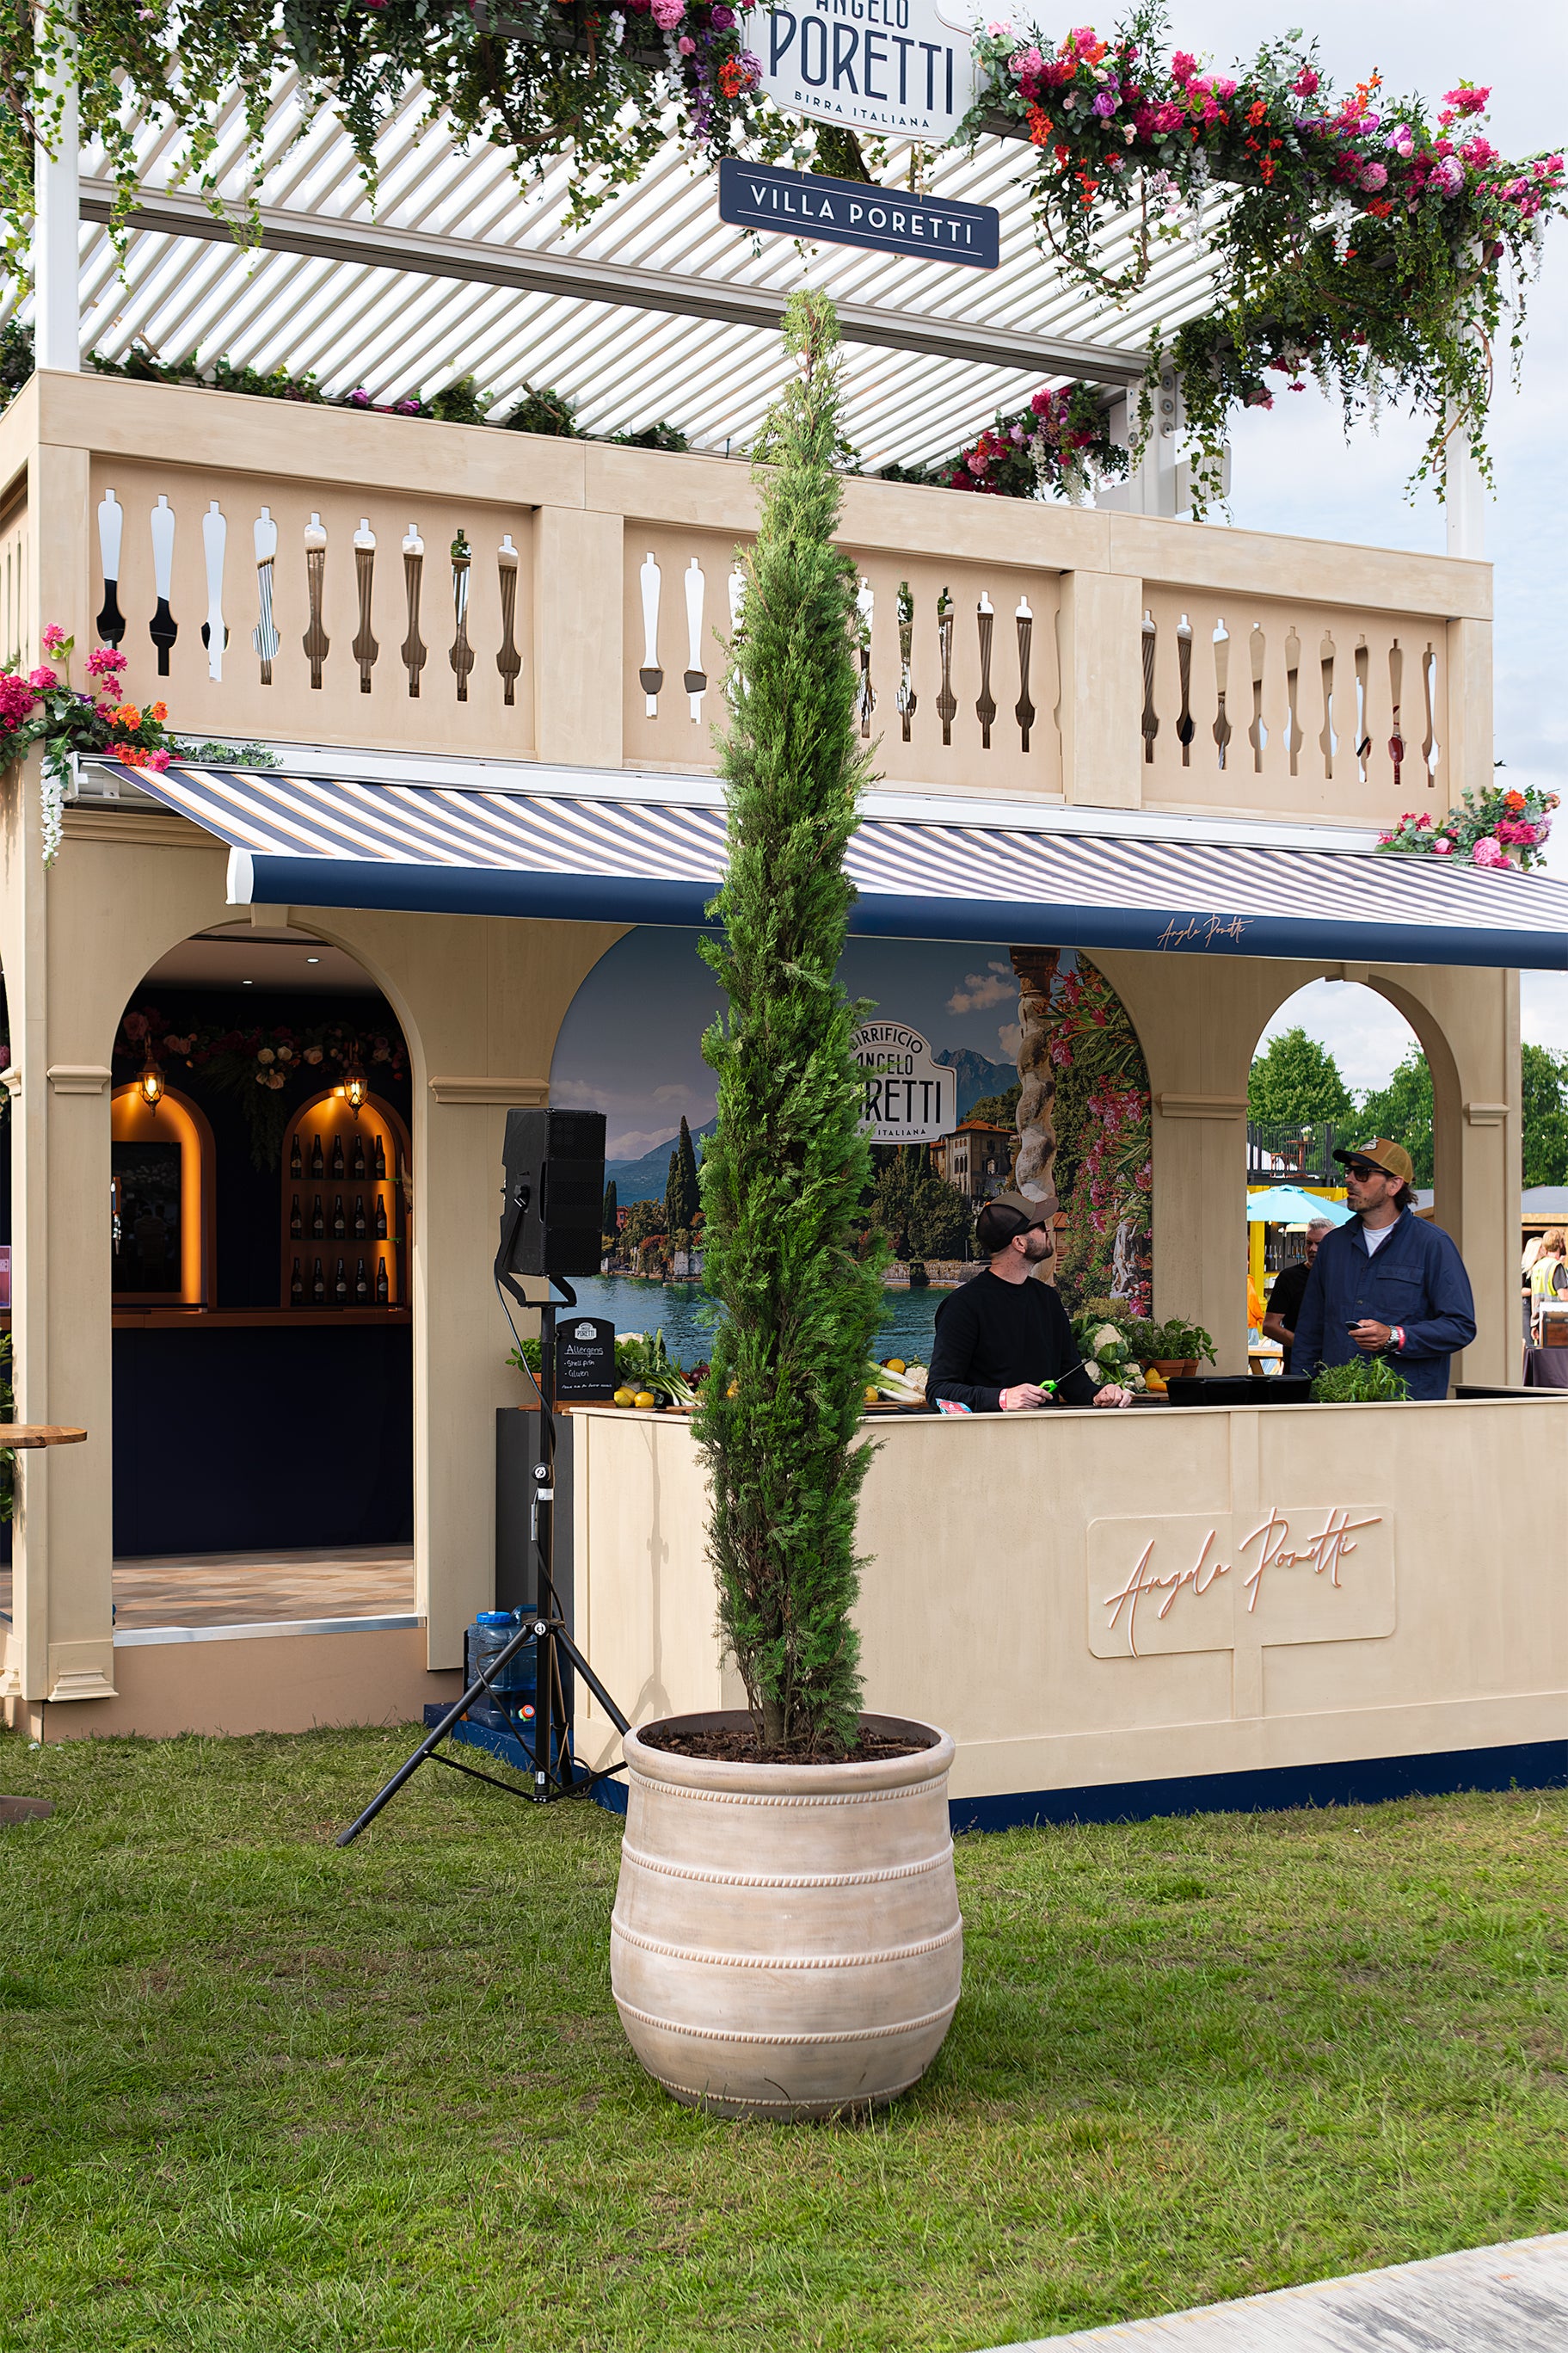 Exterior view of the Angelo Poretti stand at Regent’s Park Taste Festival, featuring a tall potted cypress tree in a beige planter by Amaranté London. The floral decor includes vibrant flowers in pink, orange, and white, creating a Mediterranean feel. An example of Amaranté London’s plant hire and event floristry services.